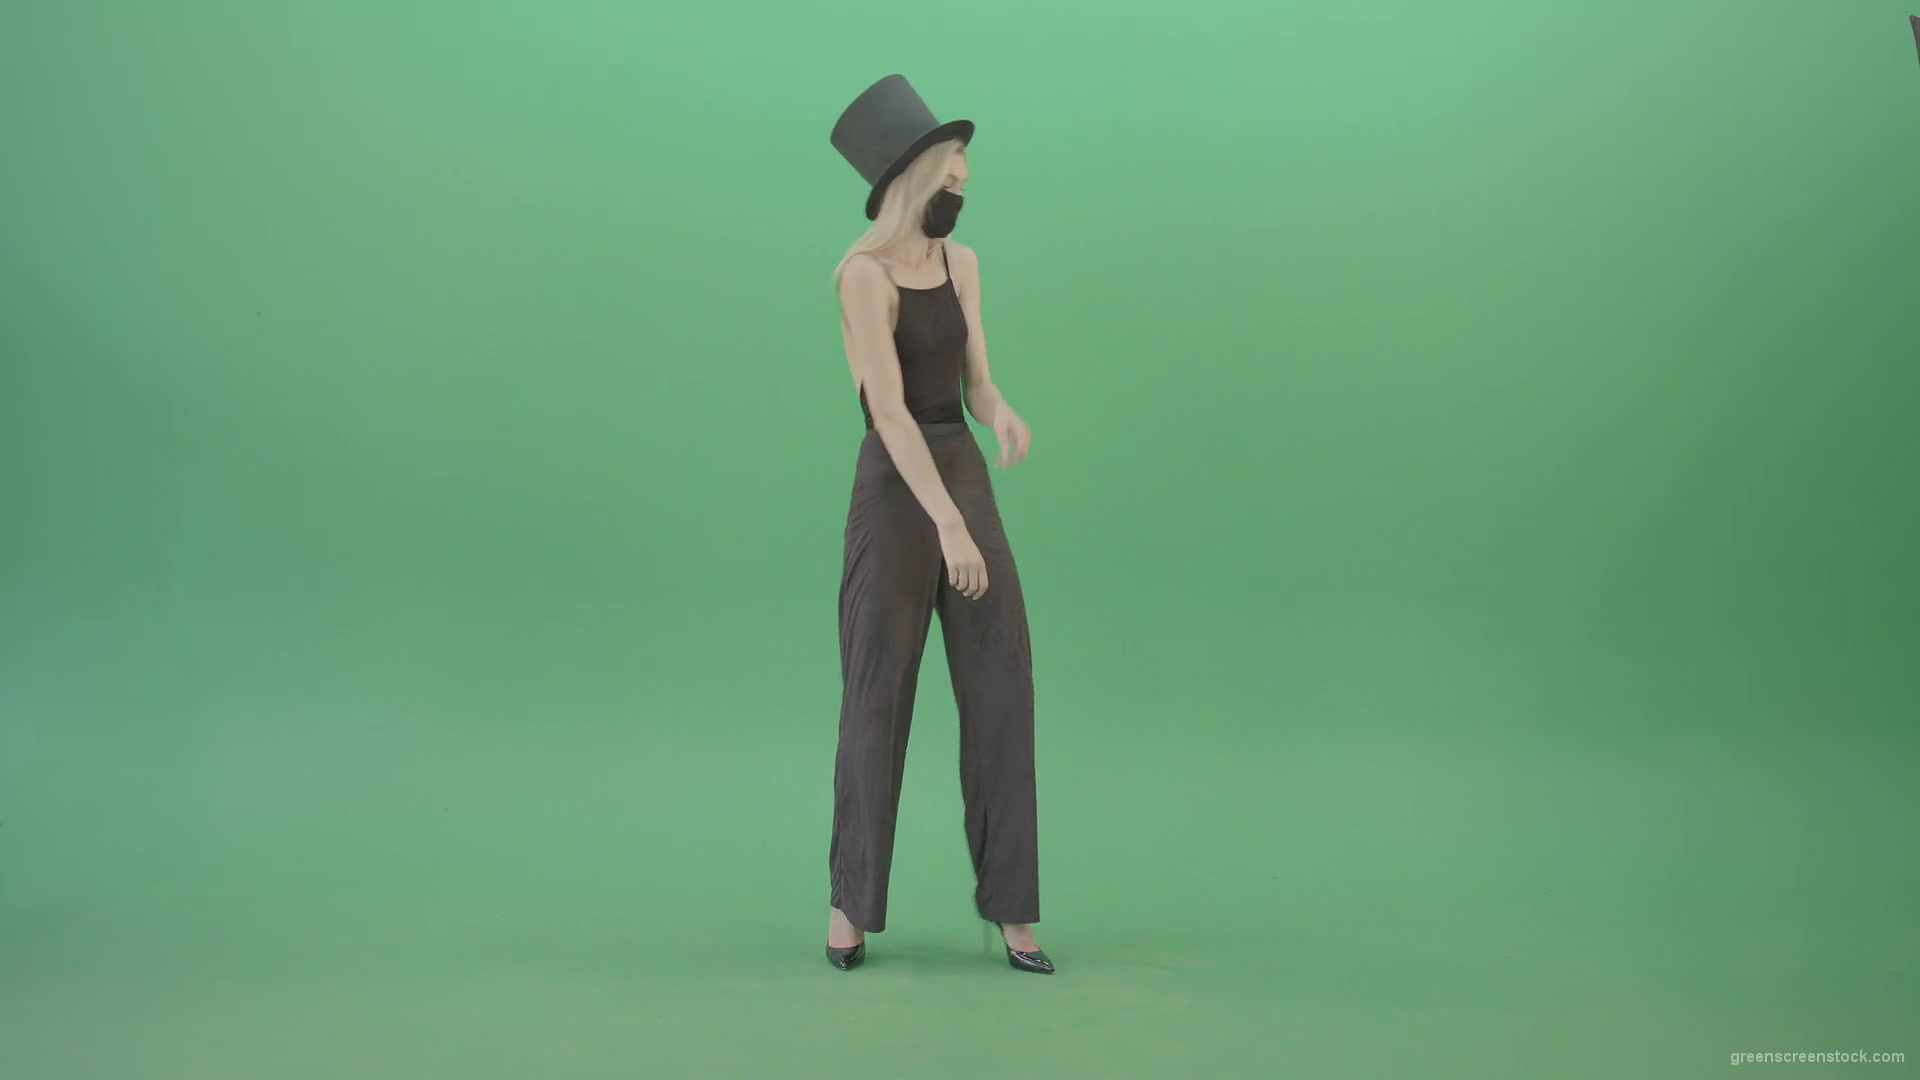 Covid-Mask-Girl-in-Black-cylinder-Hat-dancing-in-front-and-back-side-view-isolated-on-green-screen-Video-Footage-1920_002 Green Screen Stock